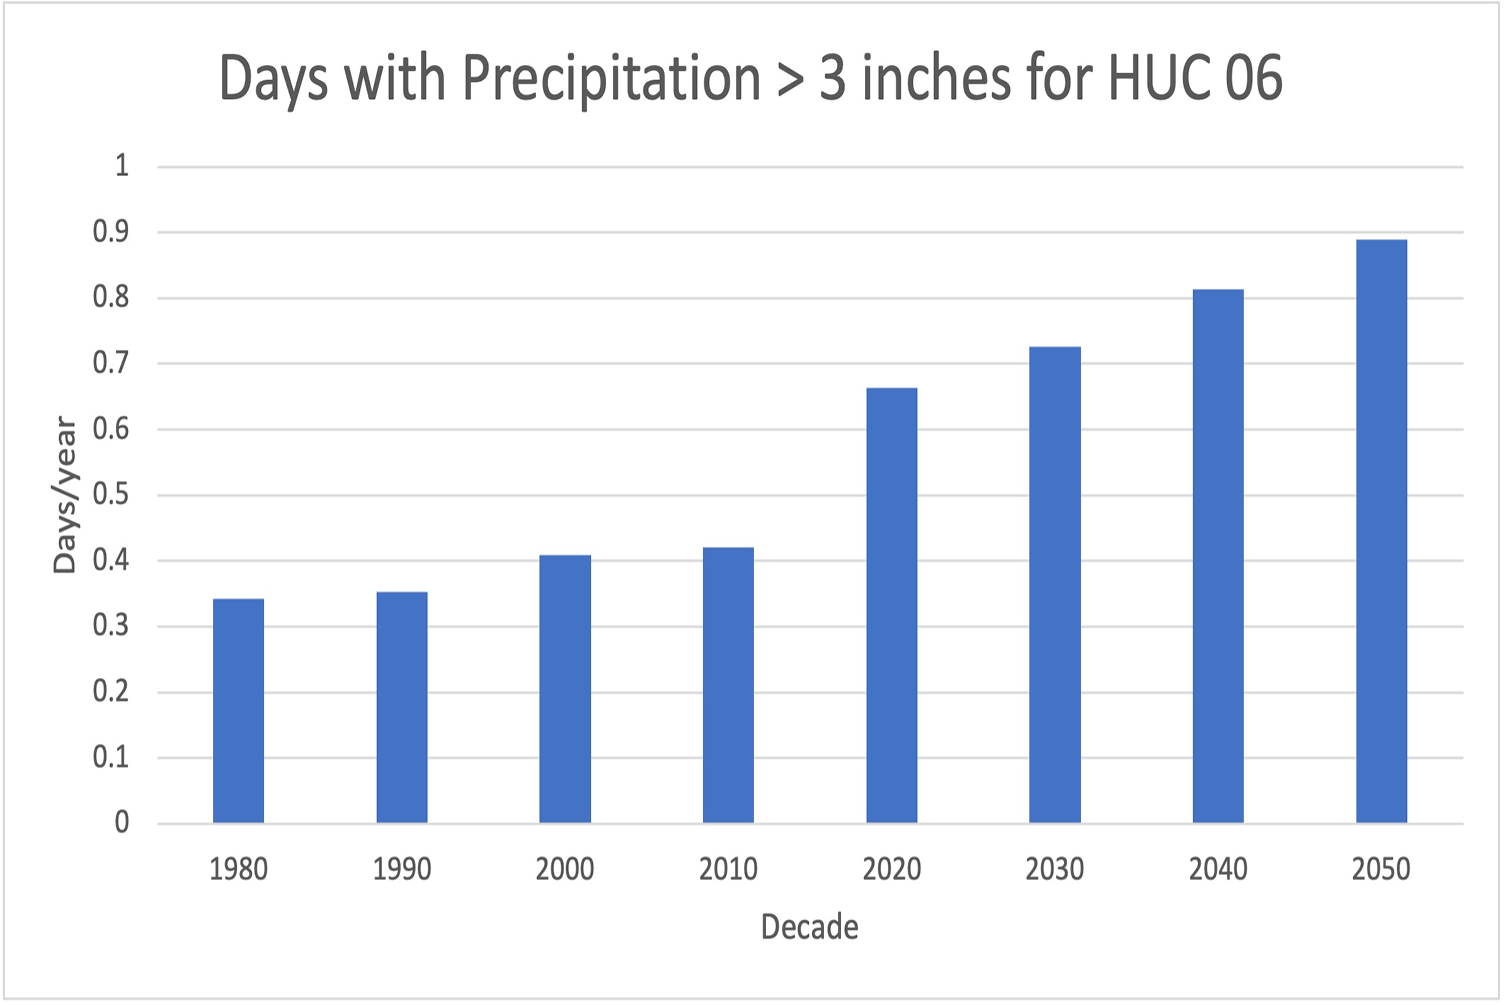 Bar graph of decade averages from 1980 to 2050 of days per year with precipitation greater than 3 inches for the Tennessee River Basin. Days per year increase every decade.